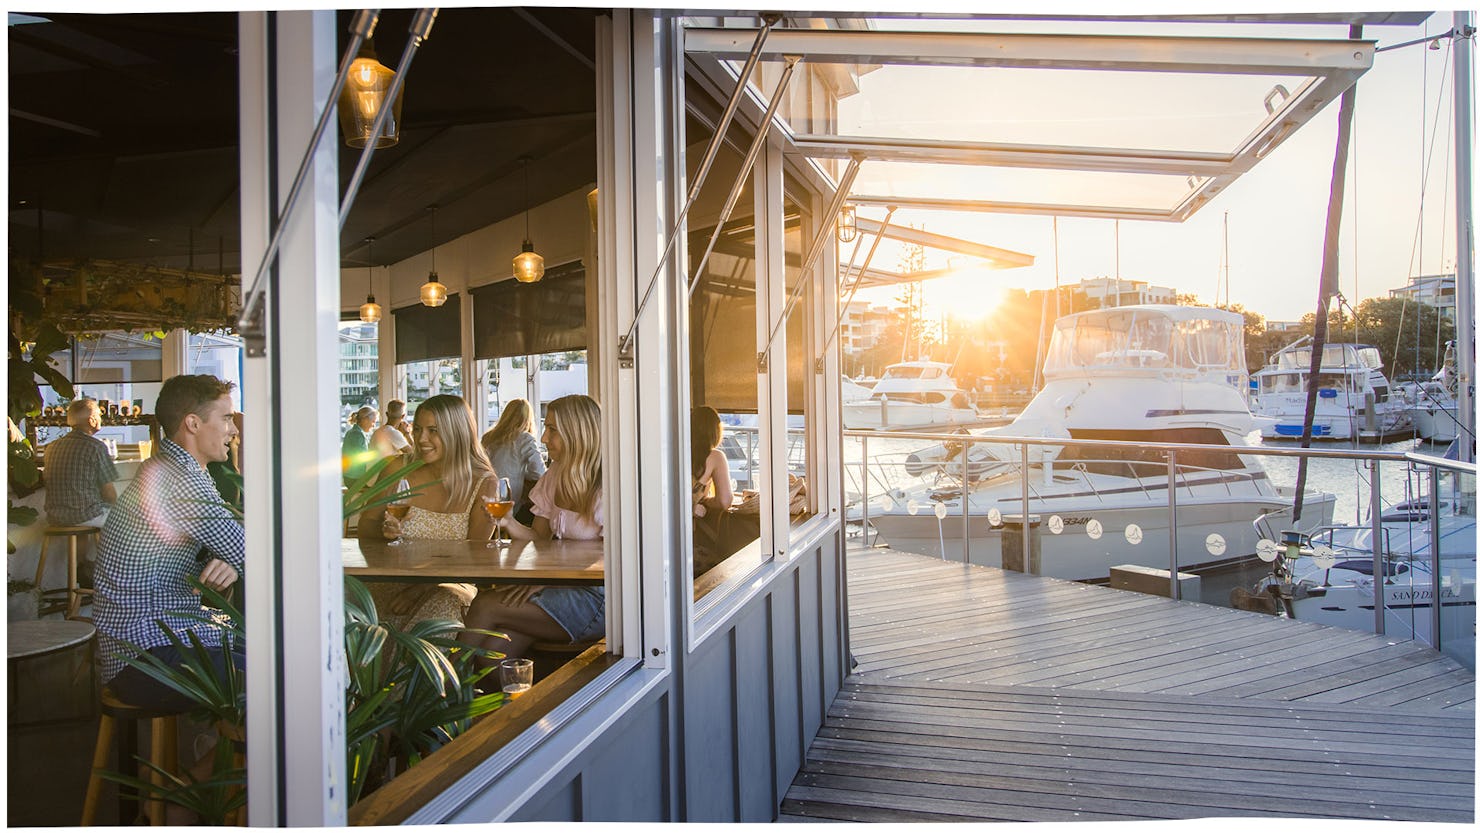 Your ultimate guide on where to eat, stay and play in Mooloolaba